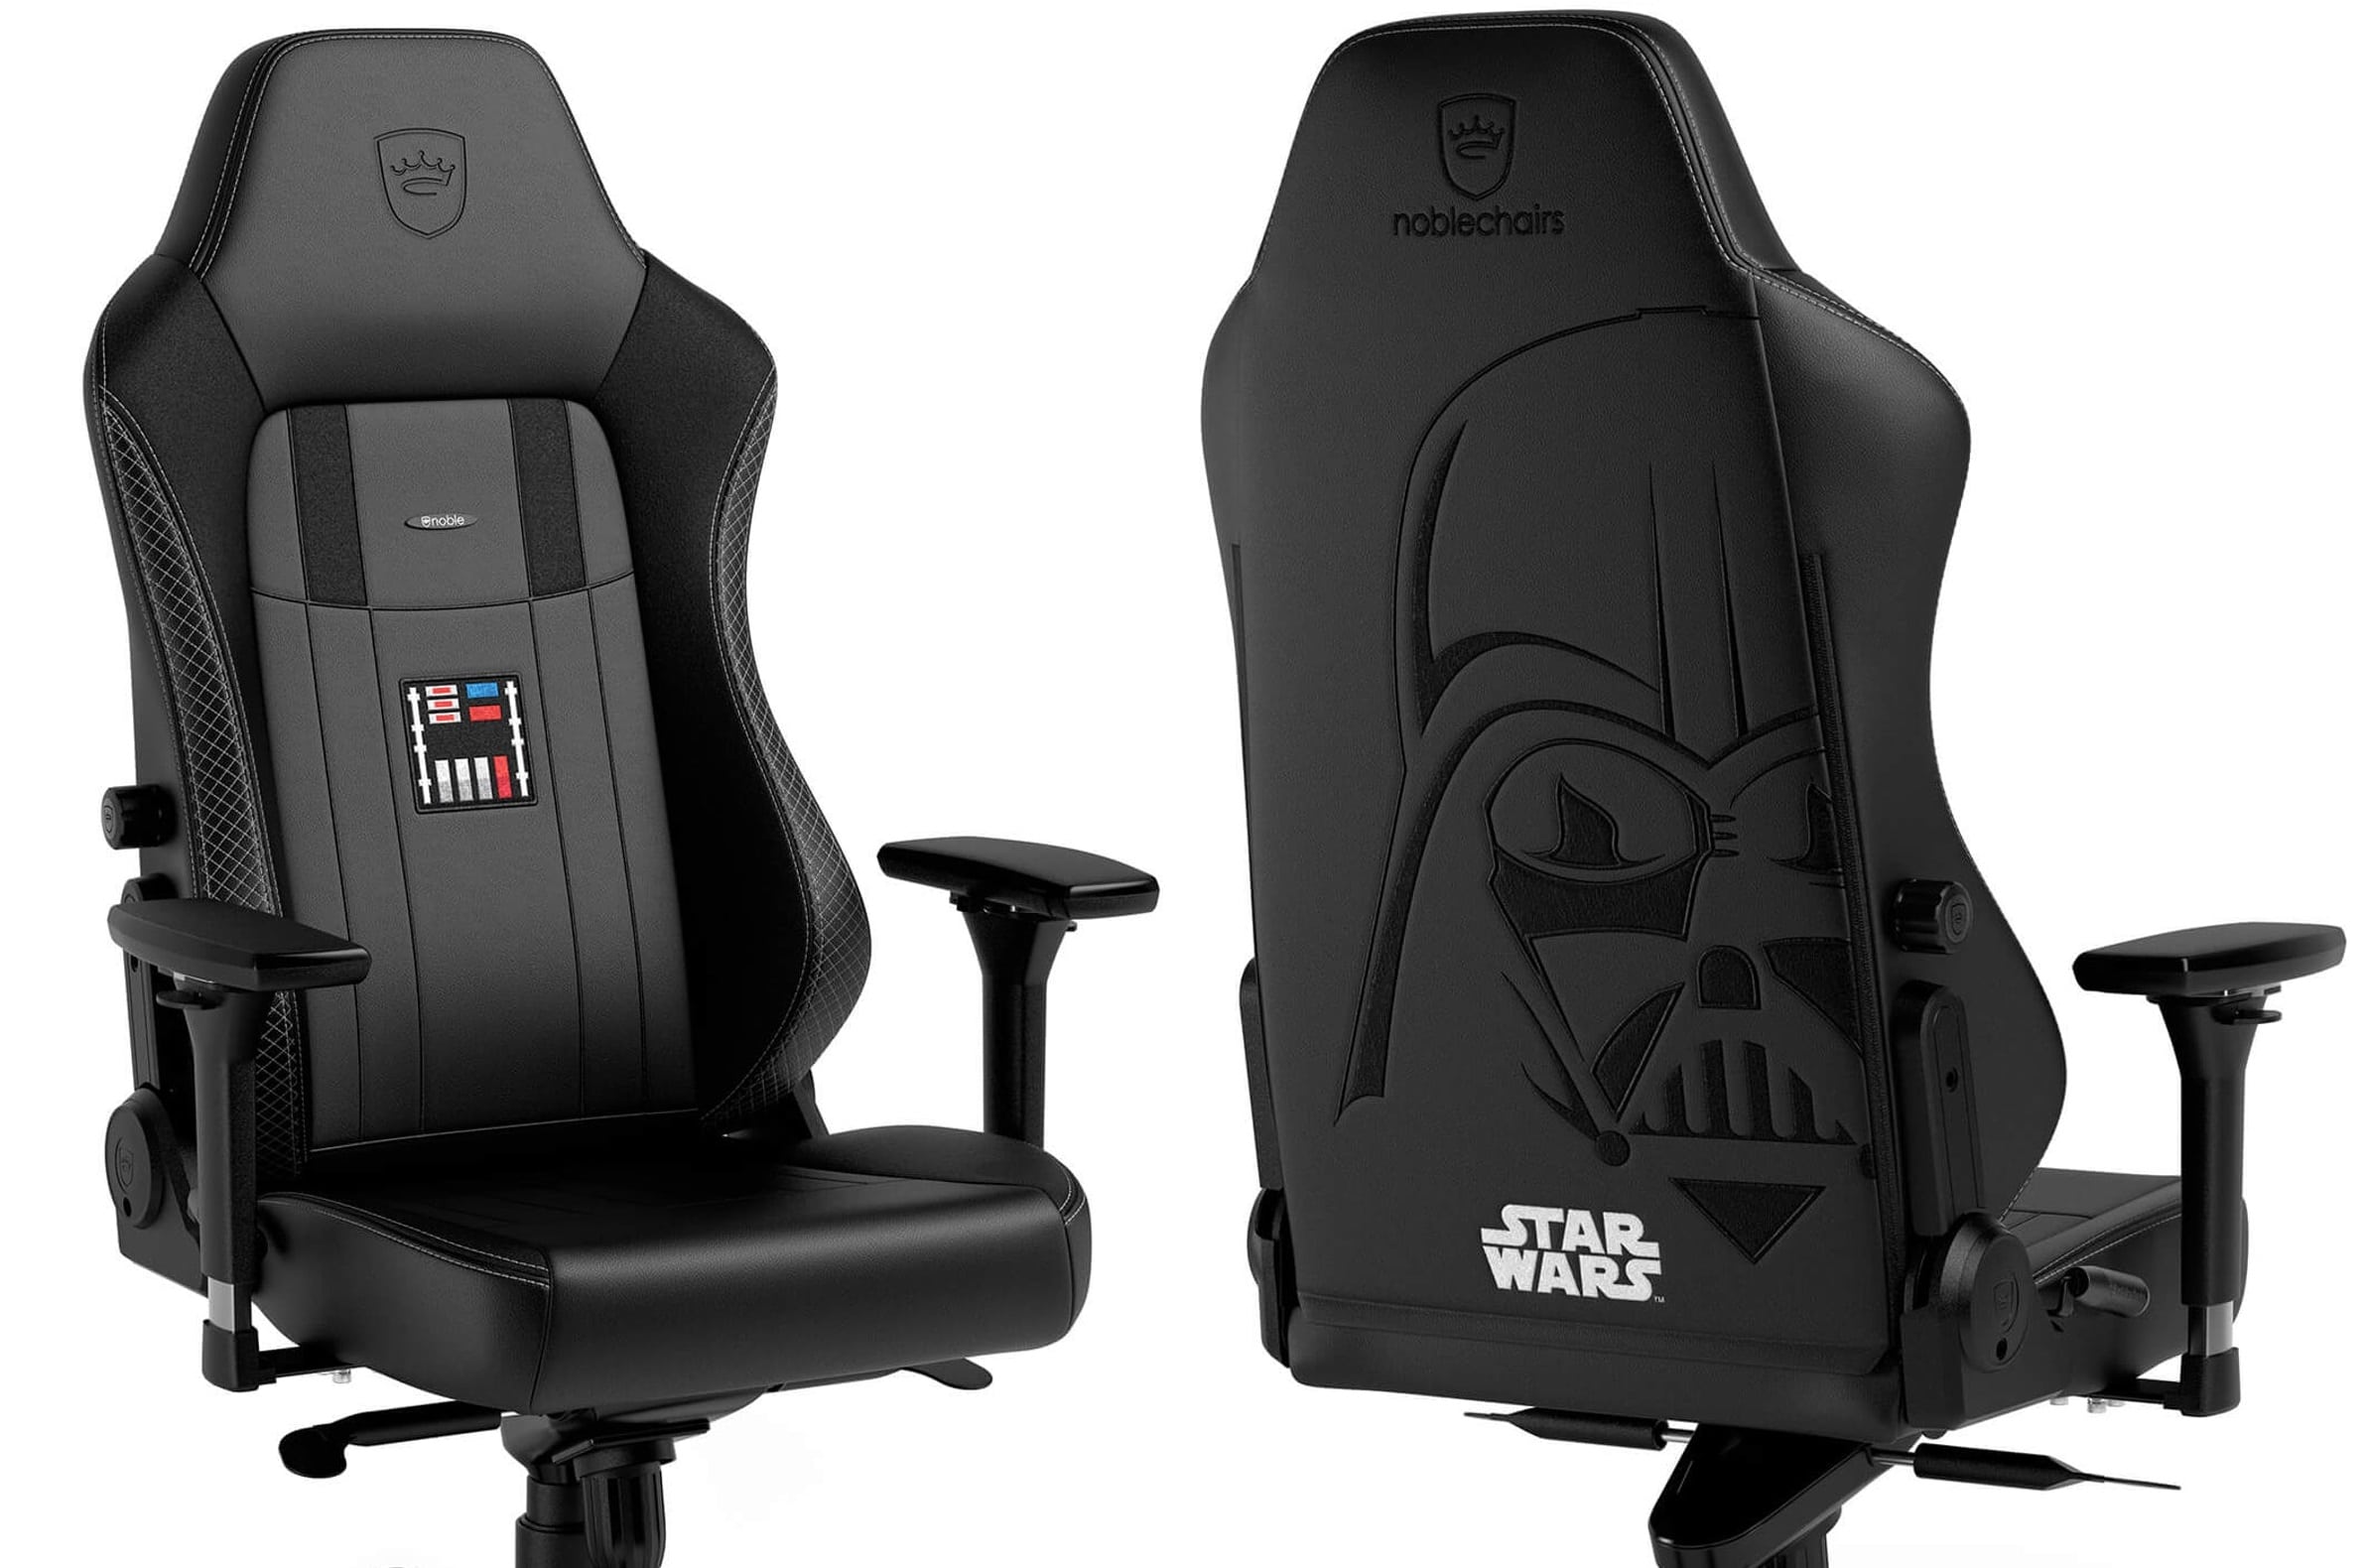 Sit on the dark side with the Noblechairs HERO